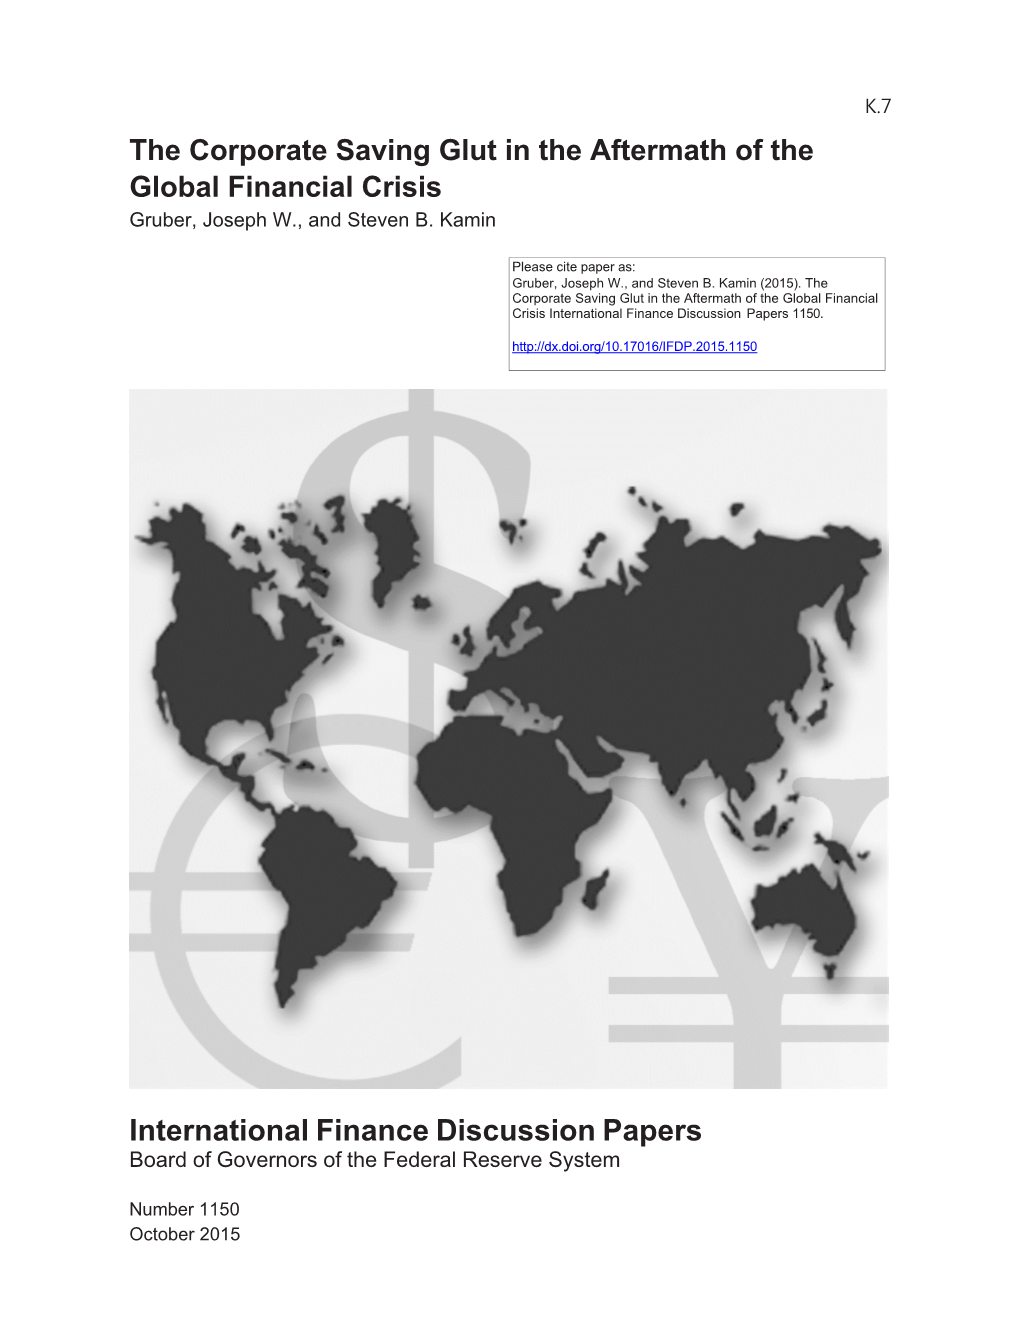 The Corporate Saving Glut in the Aftermath of the Global Financial Crisis Gruber, Joseph W., and Steven B